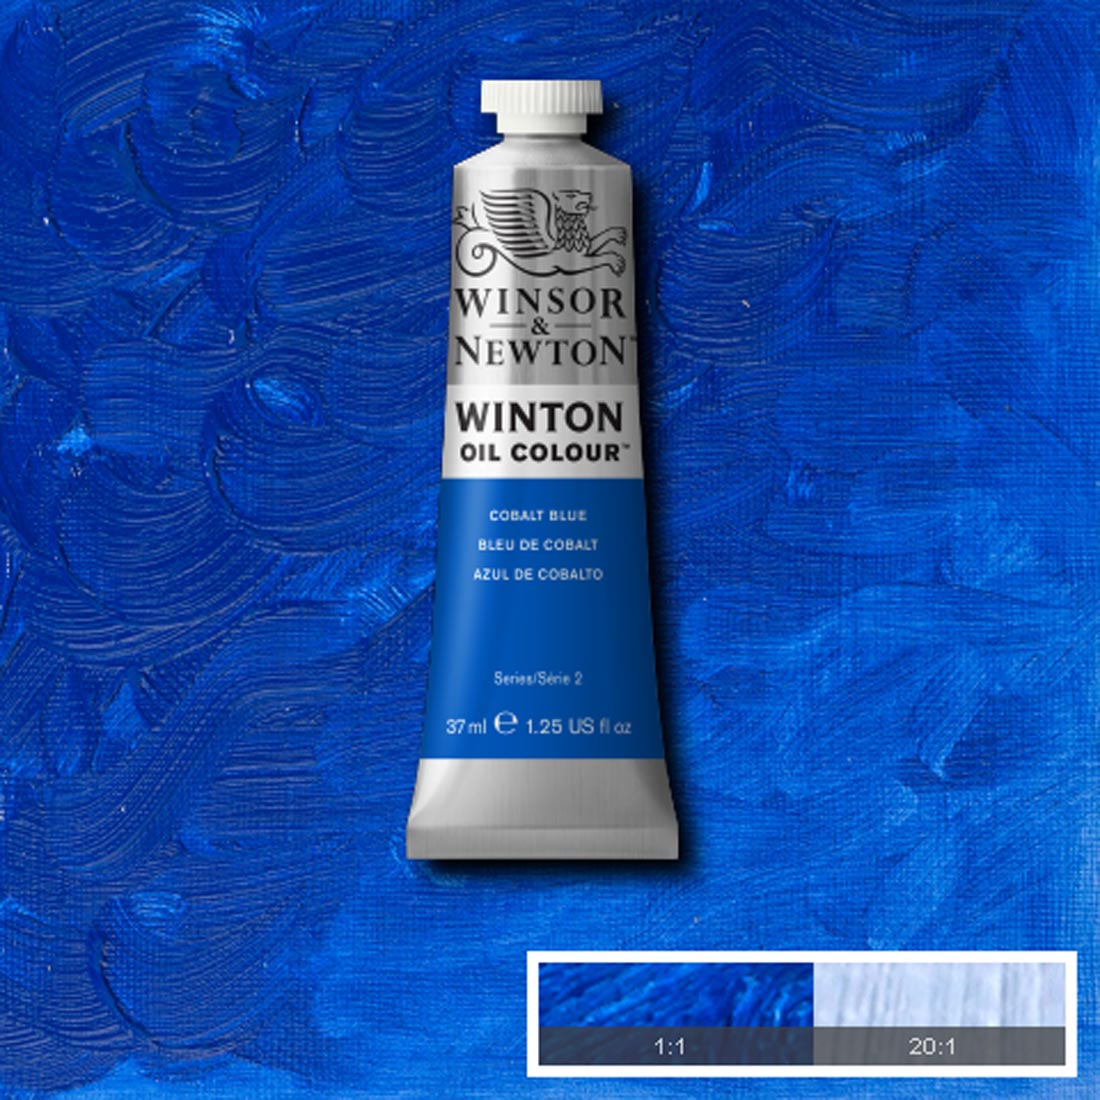 Tube of Cobalt Blue Winsor & Newton Winton Oil Colour with a paint swatch for the background